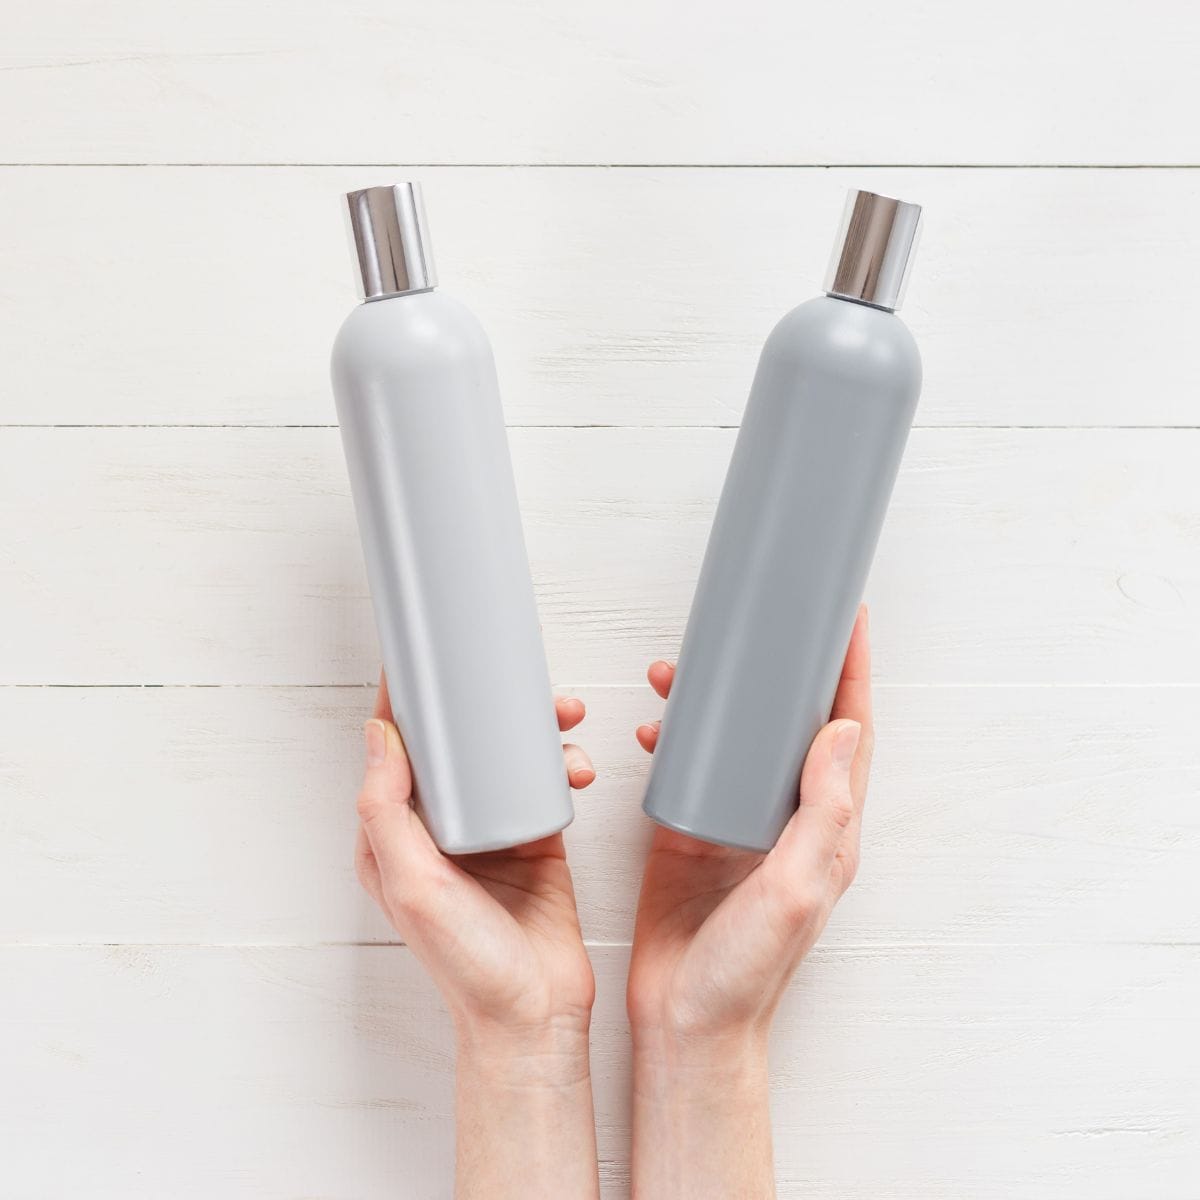 The Best Drugstore Shampoo and Conditioner: 5 Affordable Options for Healthy Hair